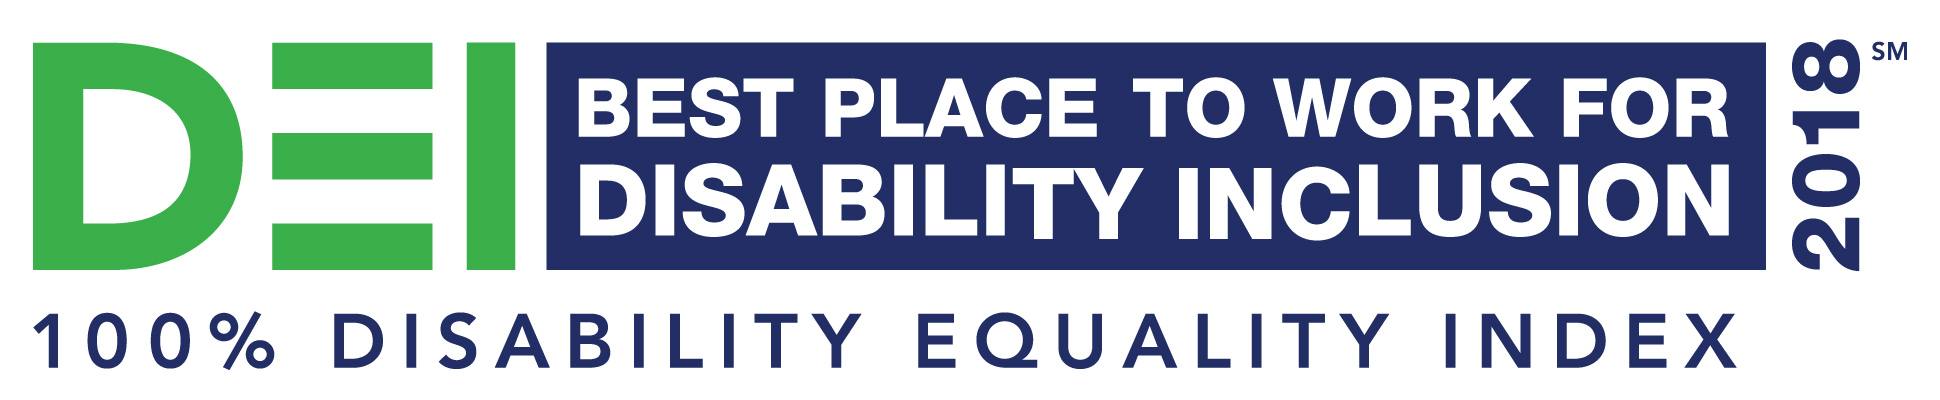 Best Place to Work for Disability Inclusion logo